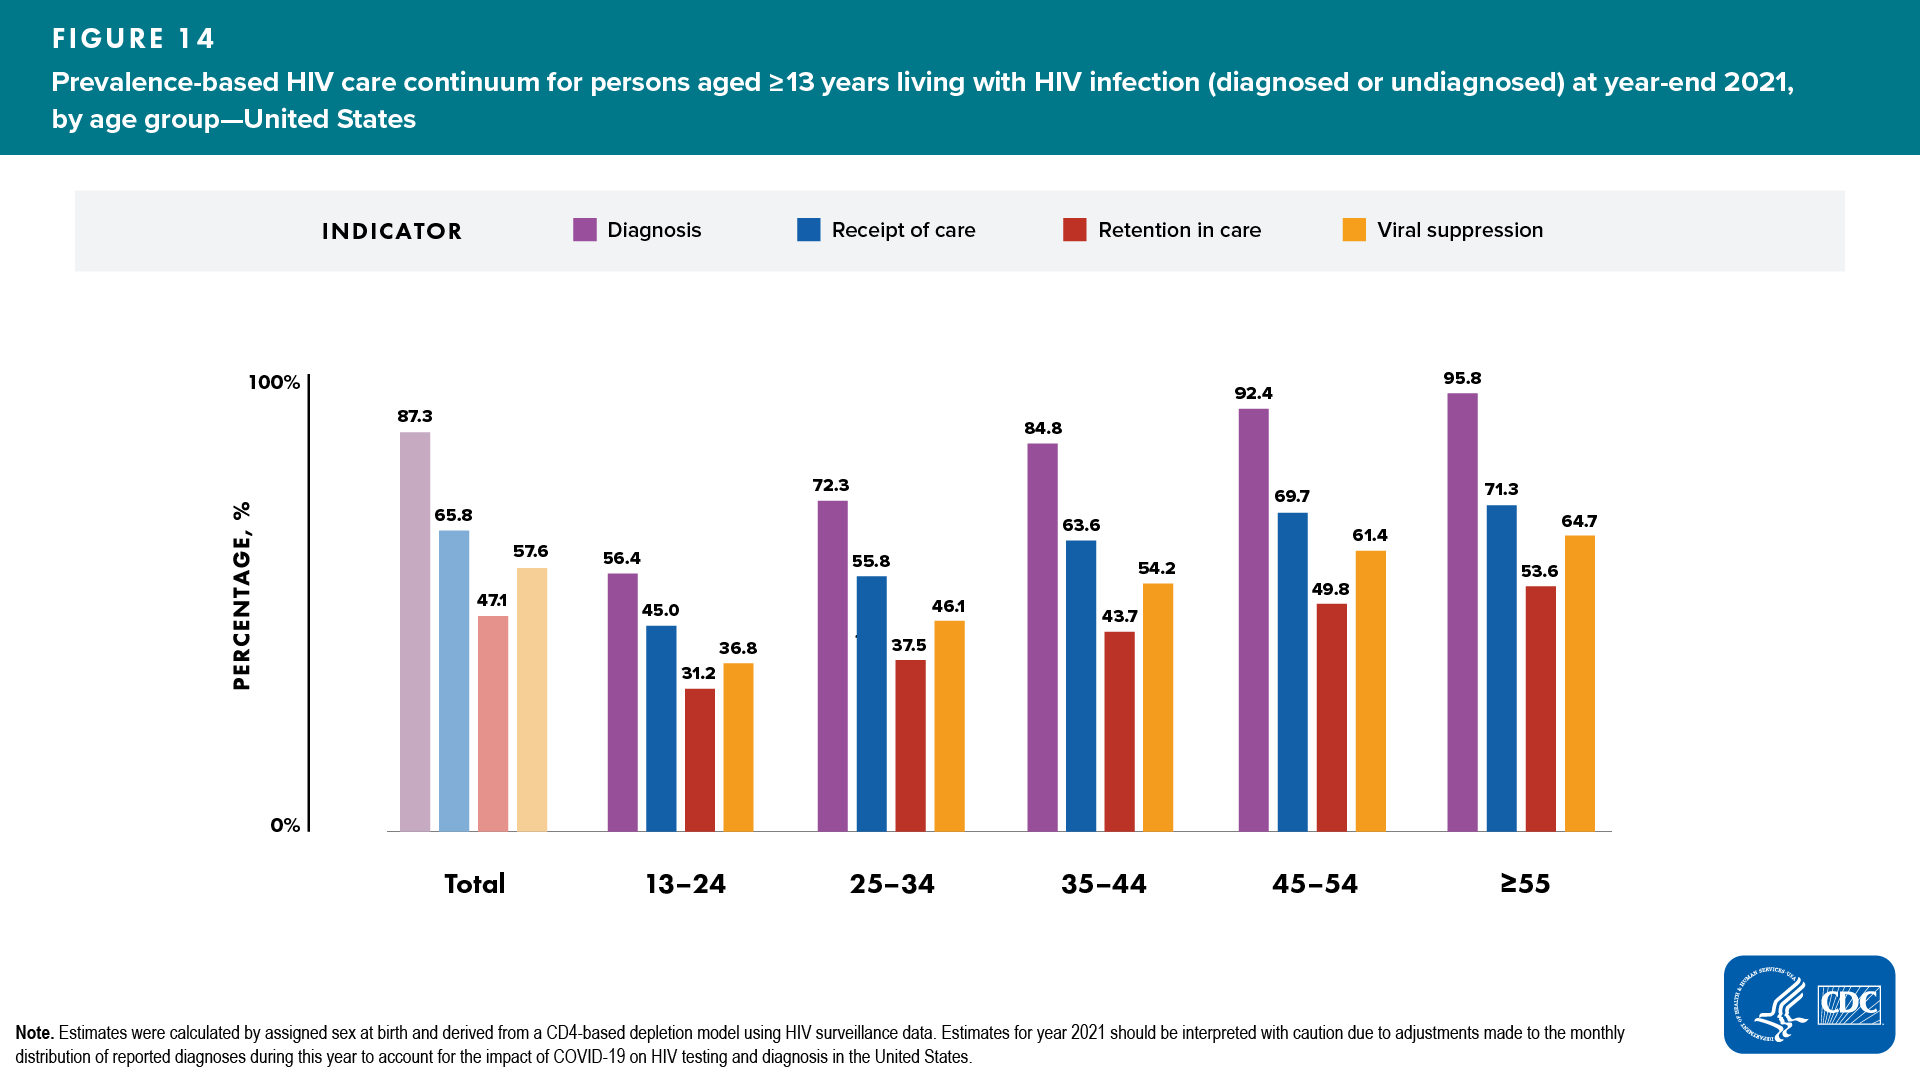 Figure 14. Prevalence-based HIV care continuum for persons aged ≥13 years living with HIV infection (diagnosed or undiagnosed) at year-end 2021, by age group—United States